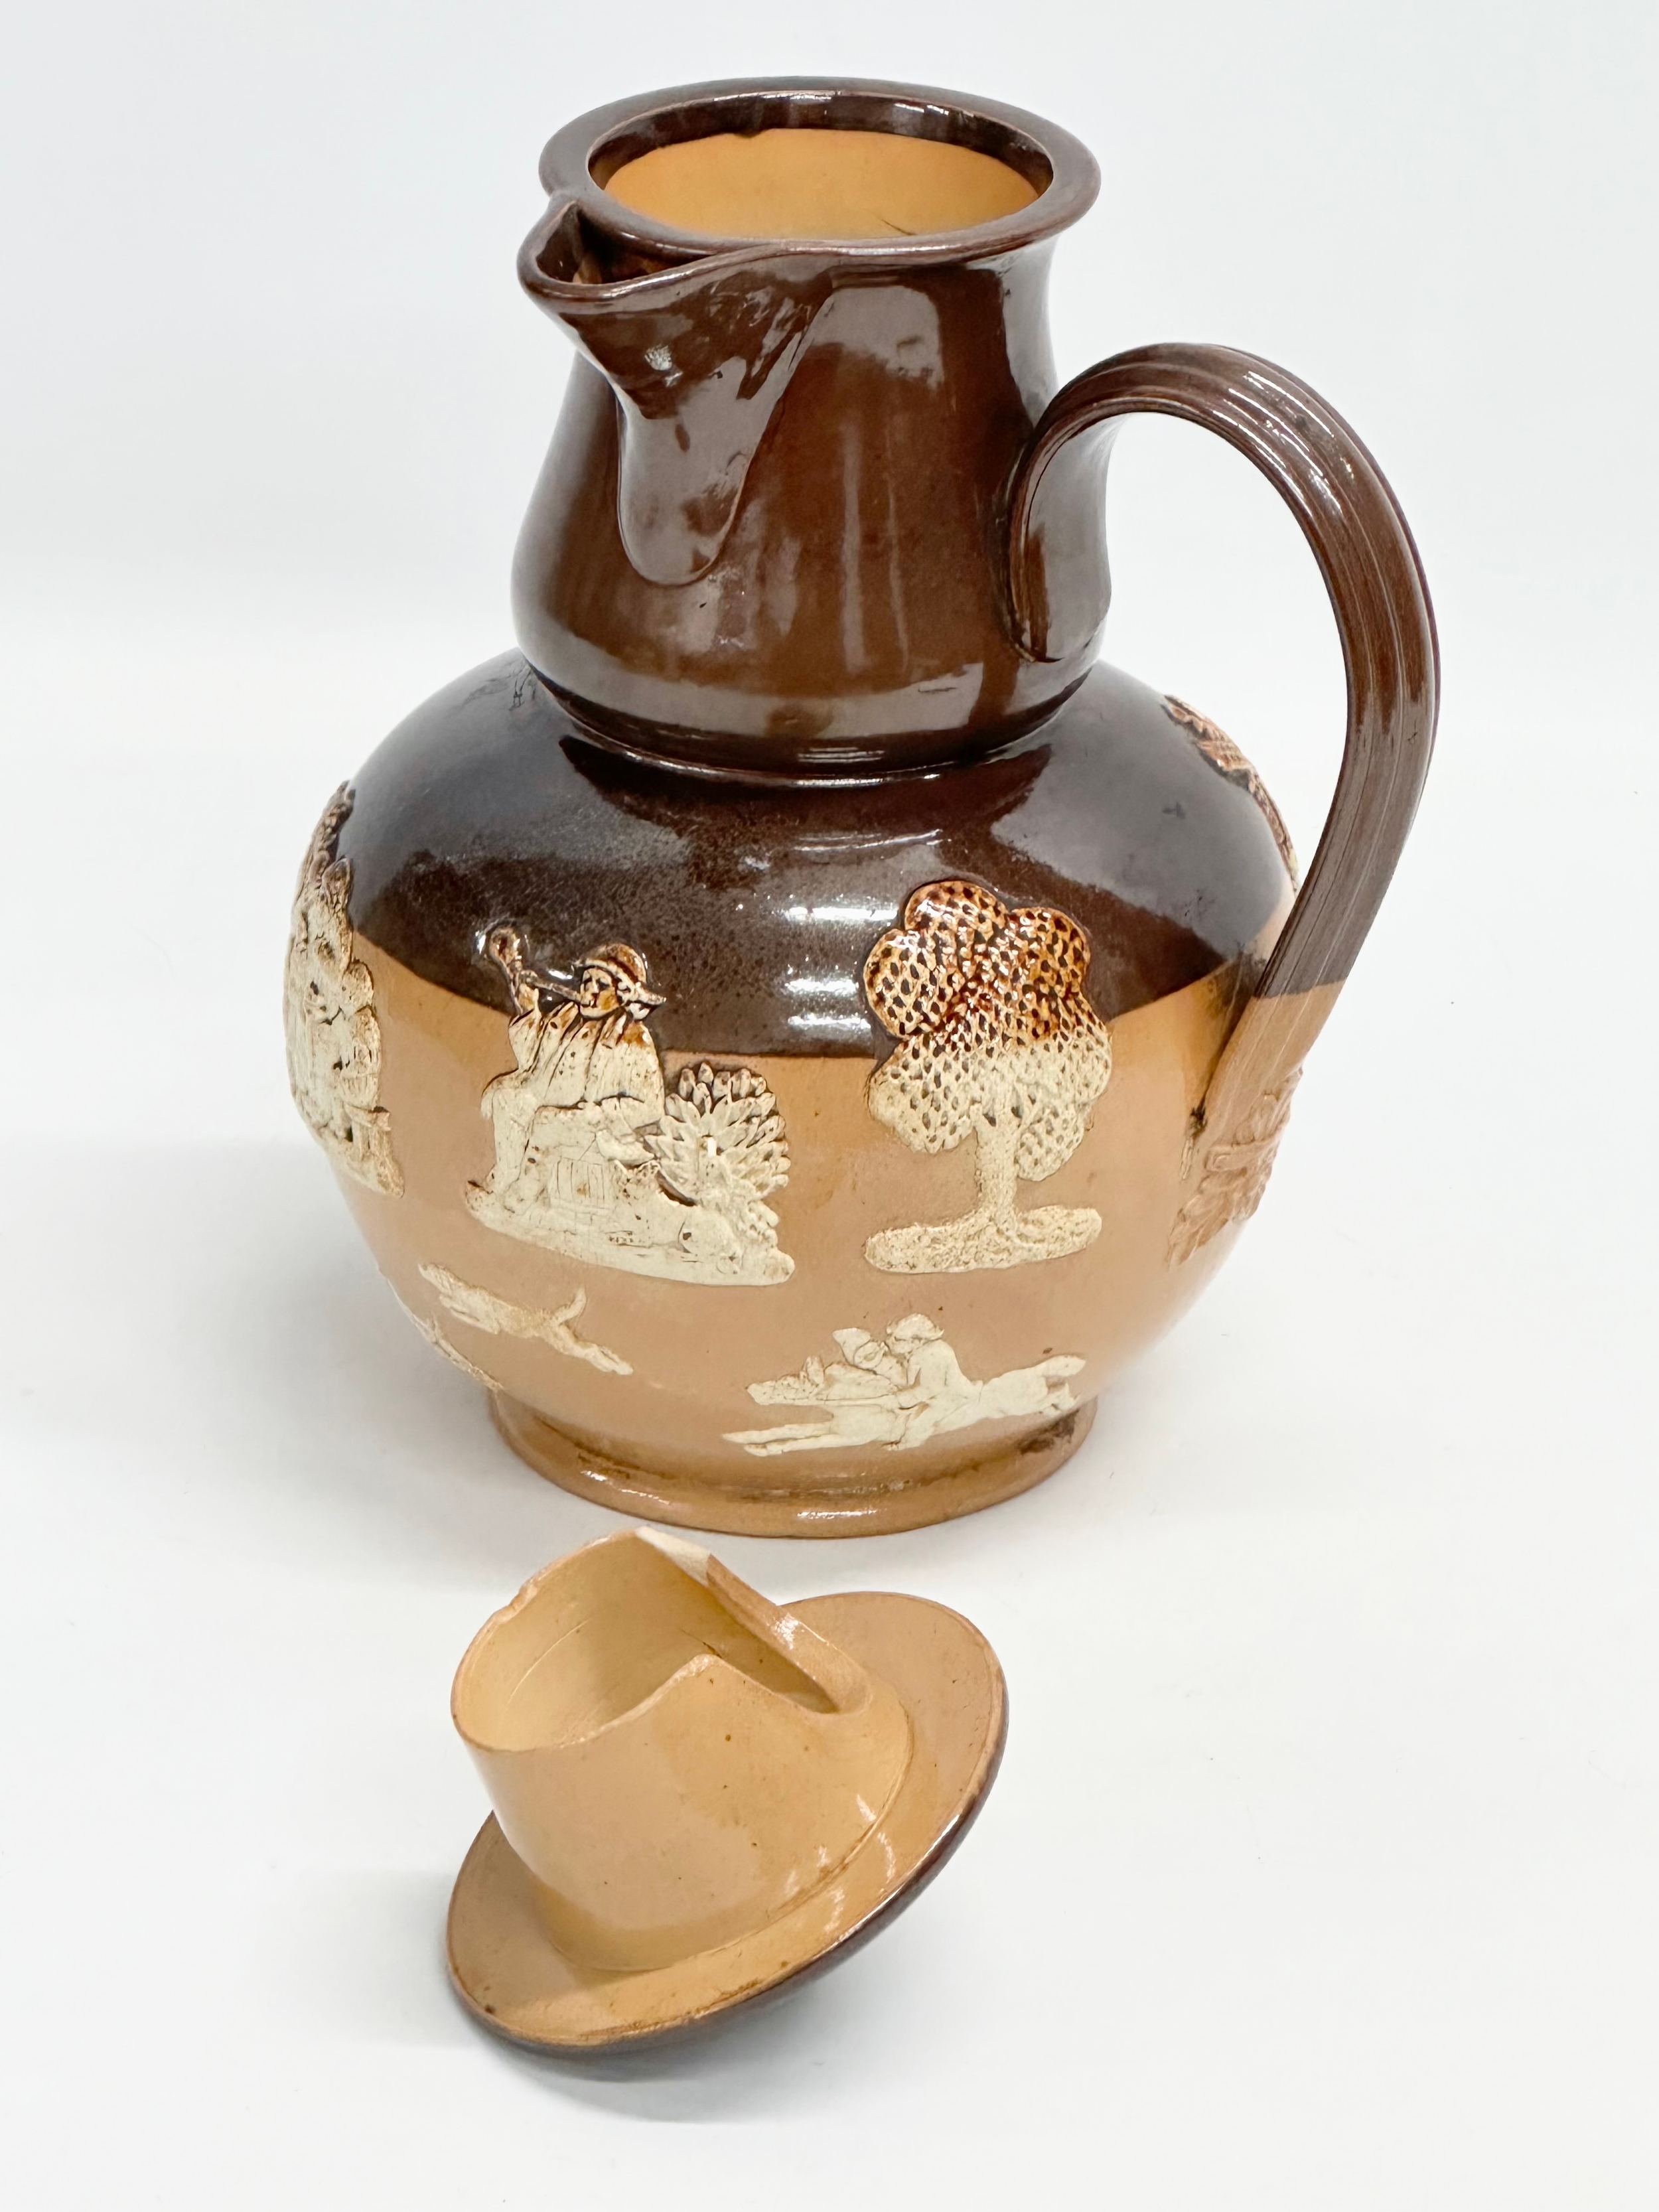 A Royal Doulton Lambeth ‘Harvest’ flagon with spout and sieve. Early 20th century. 17x15x25cm - Image 3 of 7